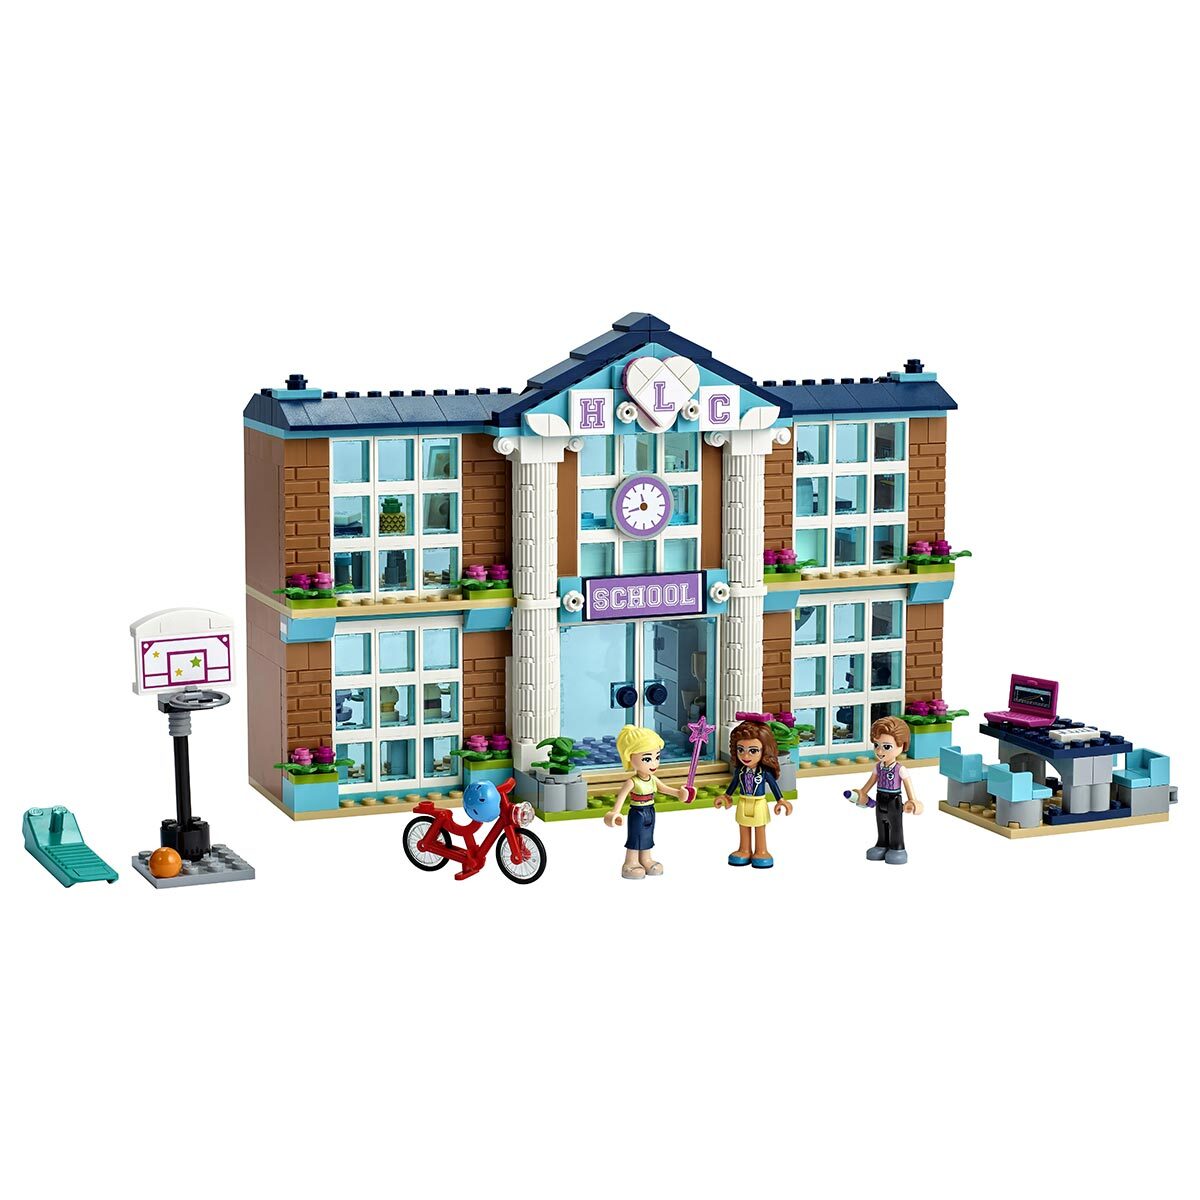 Buy LEGO Friends Heartlake City School Overview Image at costco.co.uk